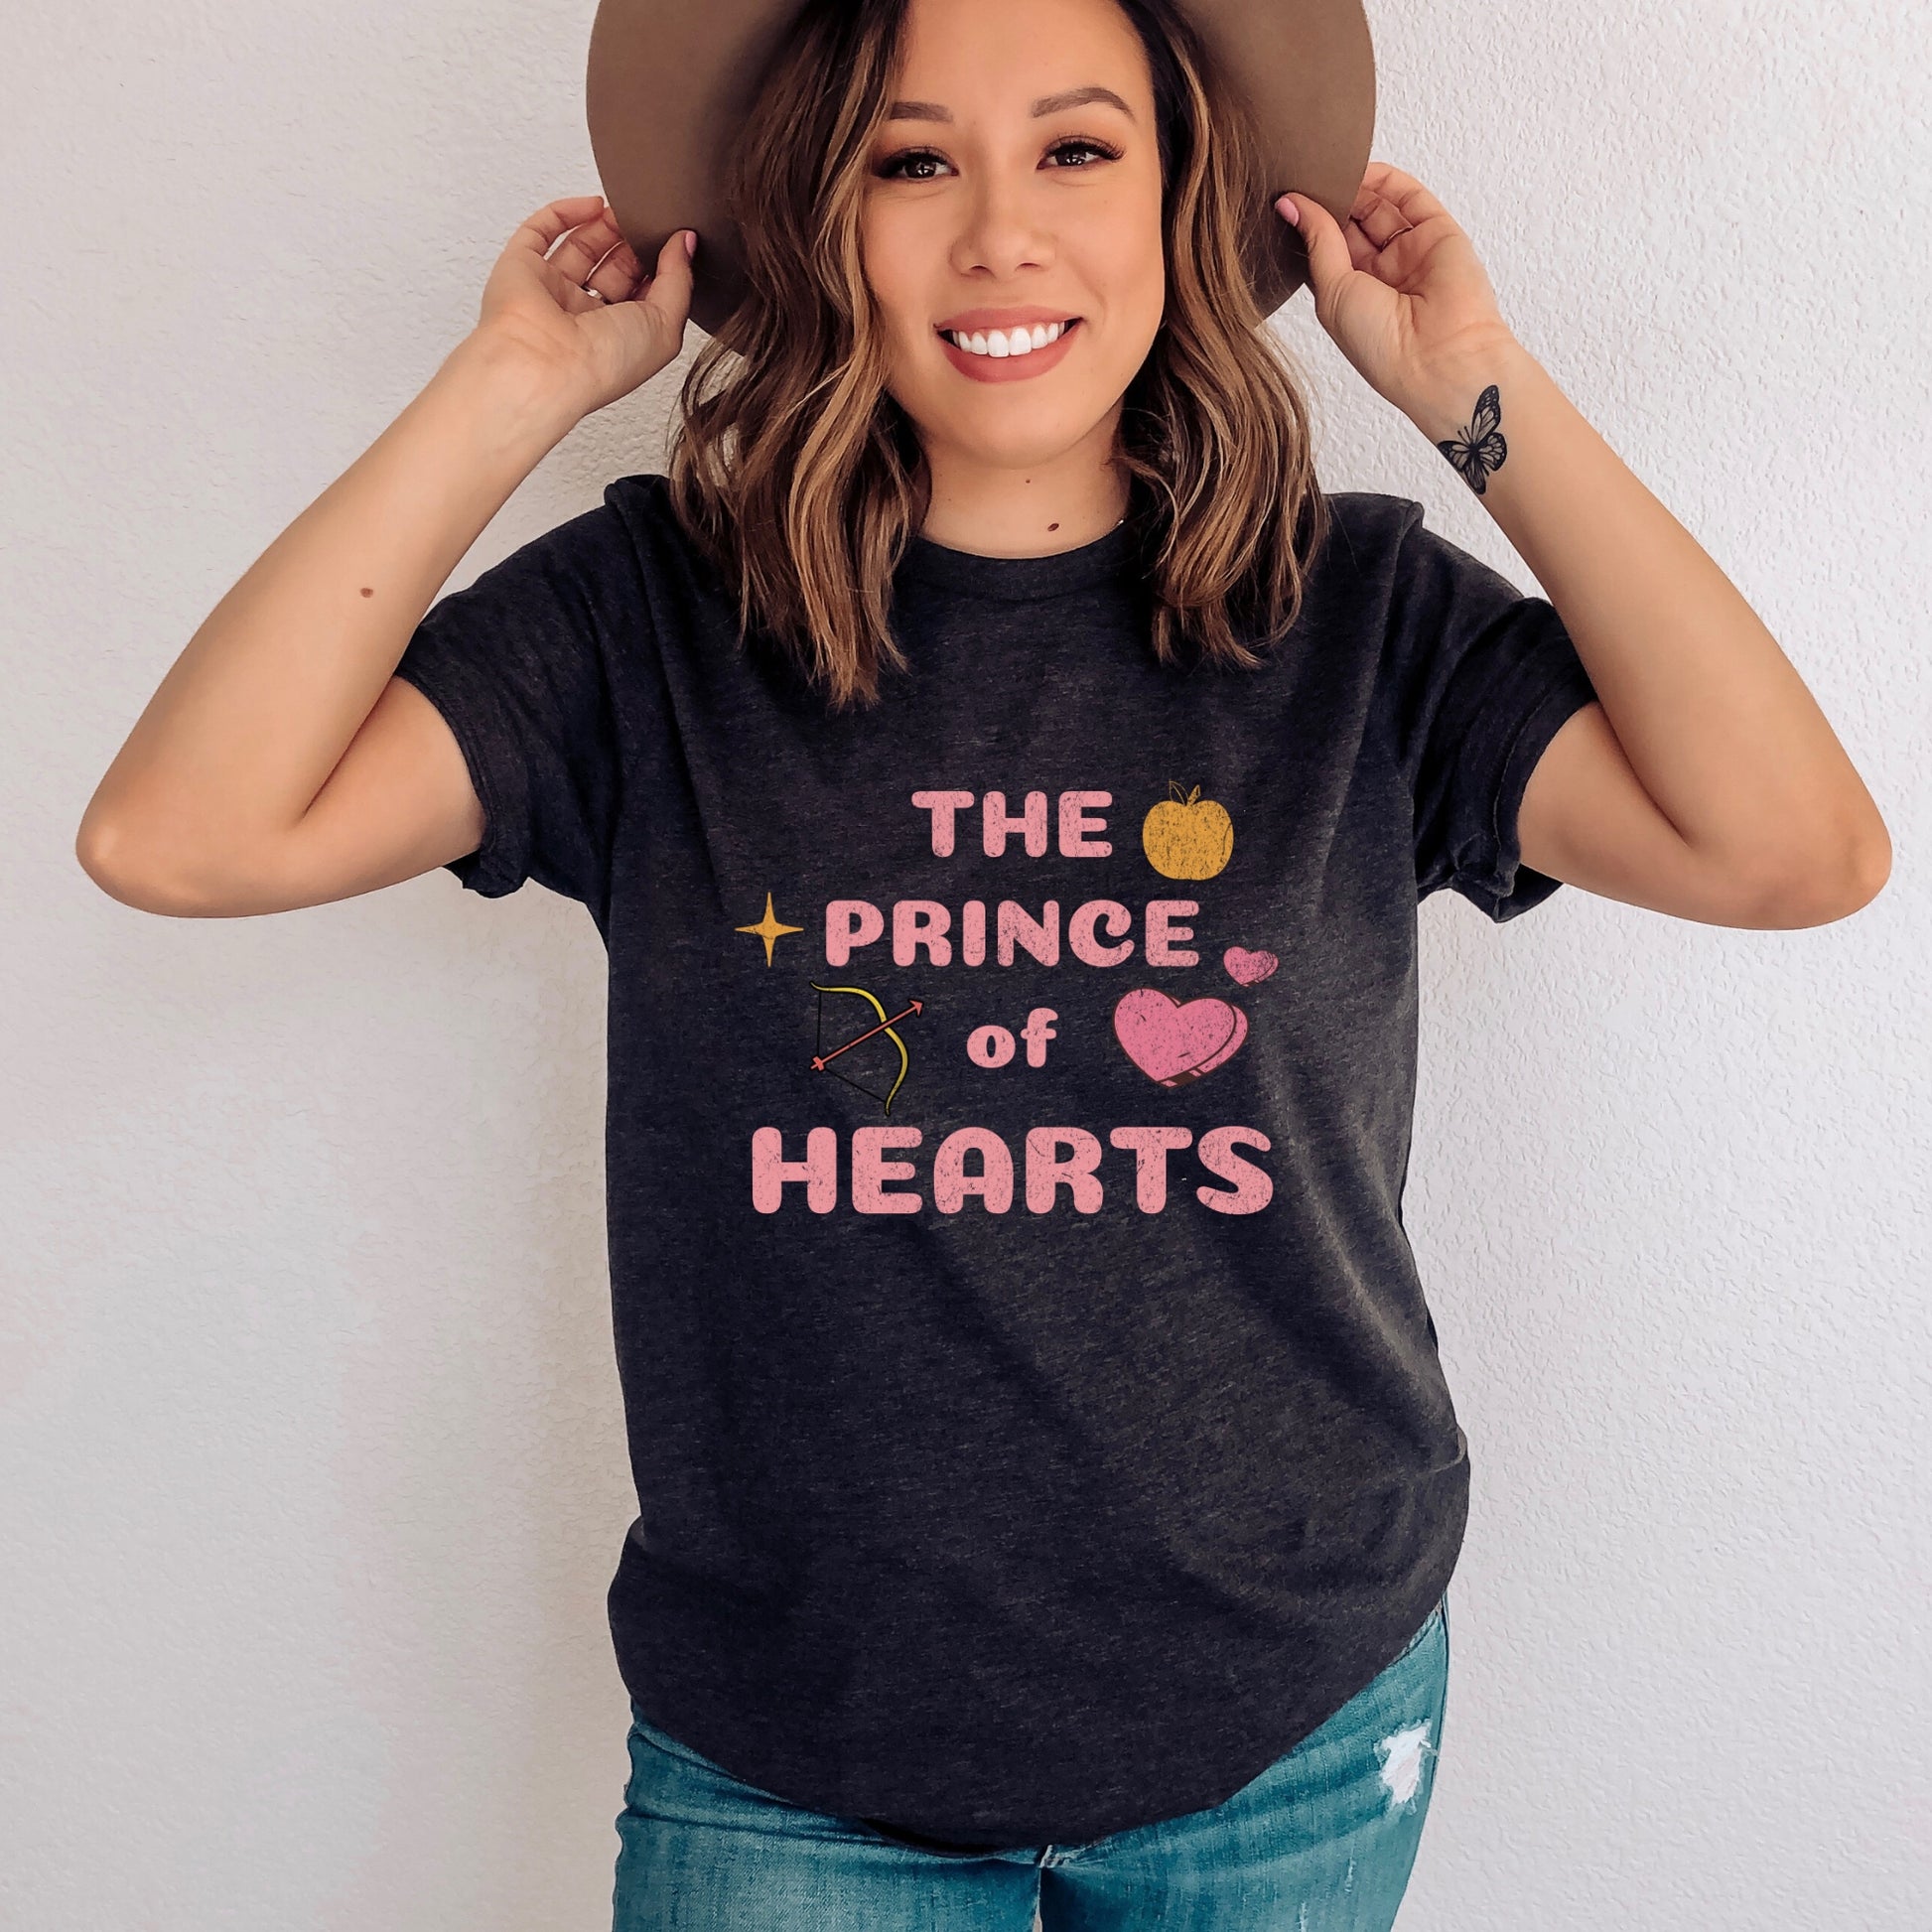 Jacks The Prince of Hearts on a Dark Grey Heather T- Shirt | Once upon a Broken Heart merch | Ink and Stories bookish merch